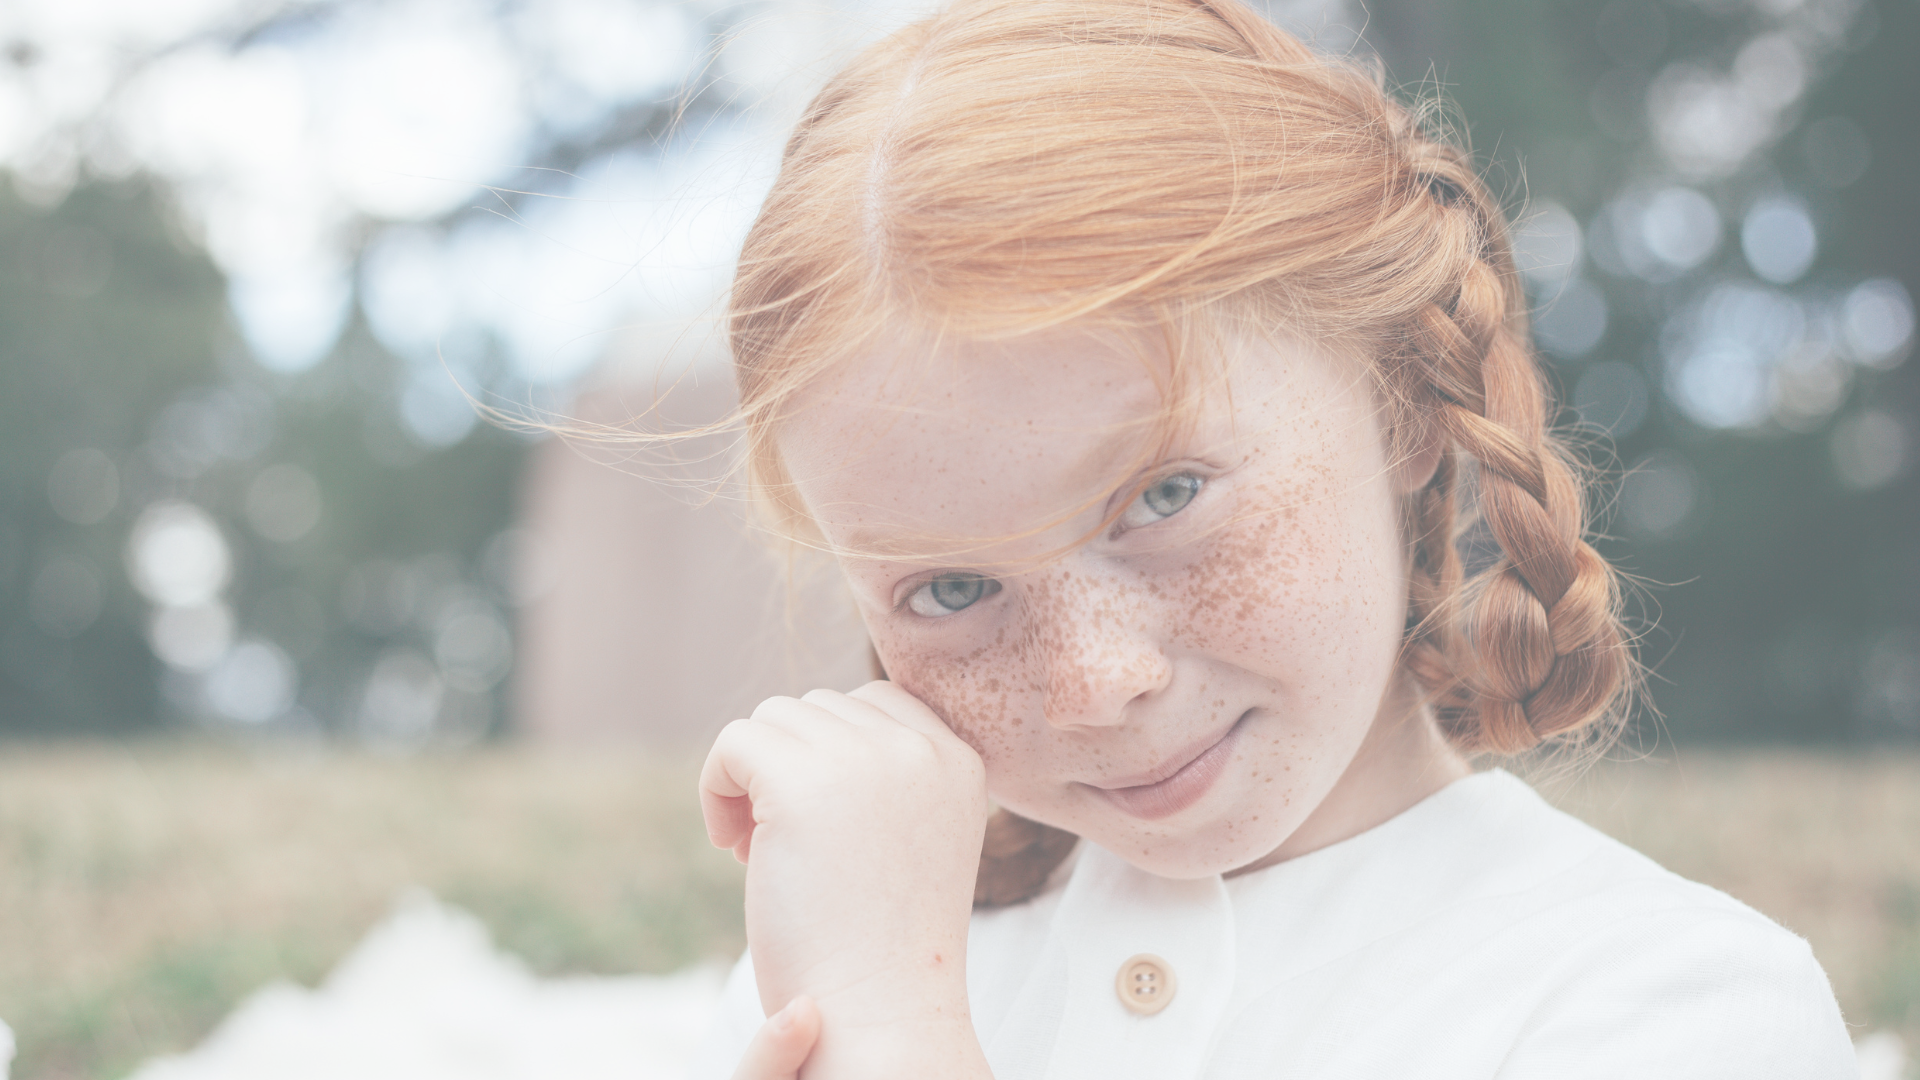 Why Do Redheads Have Freckles On Some Parts Of Their Bodies and Not Others?